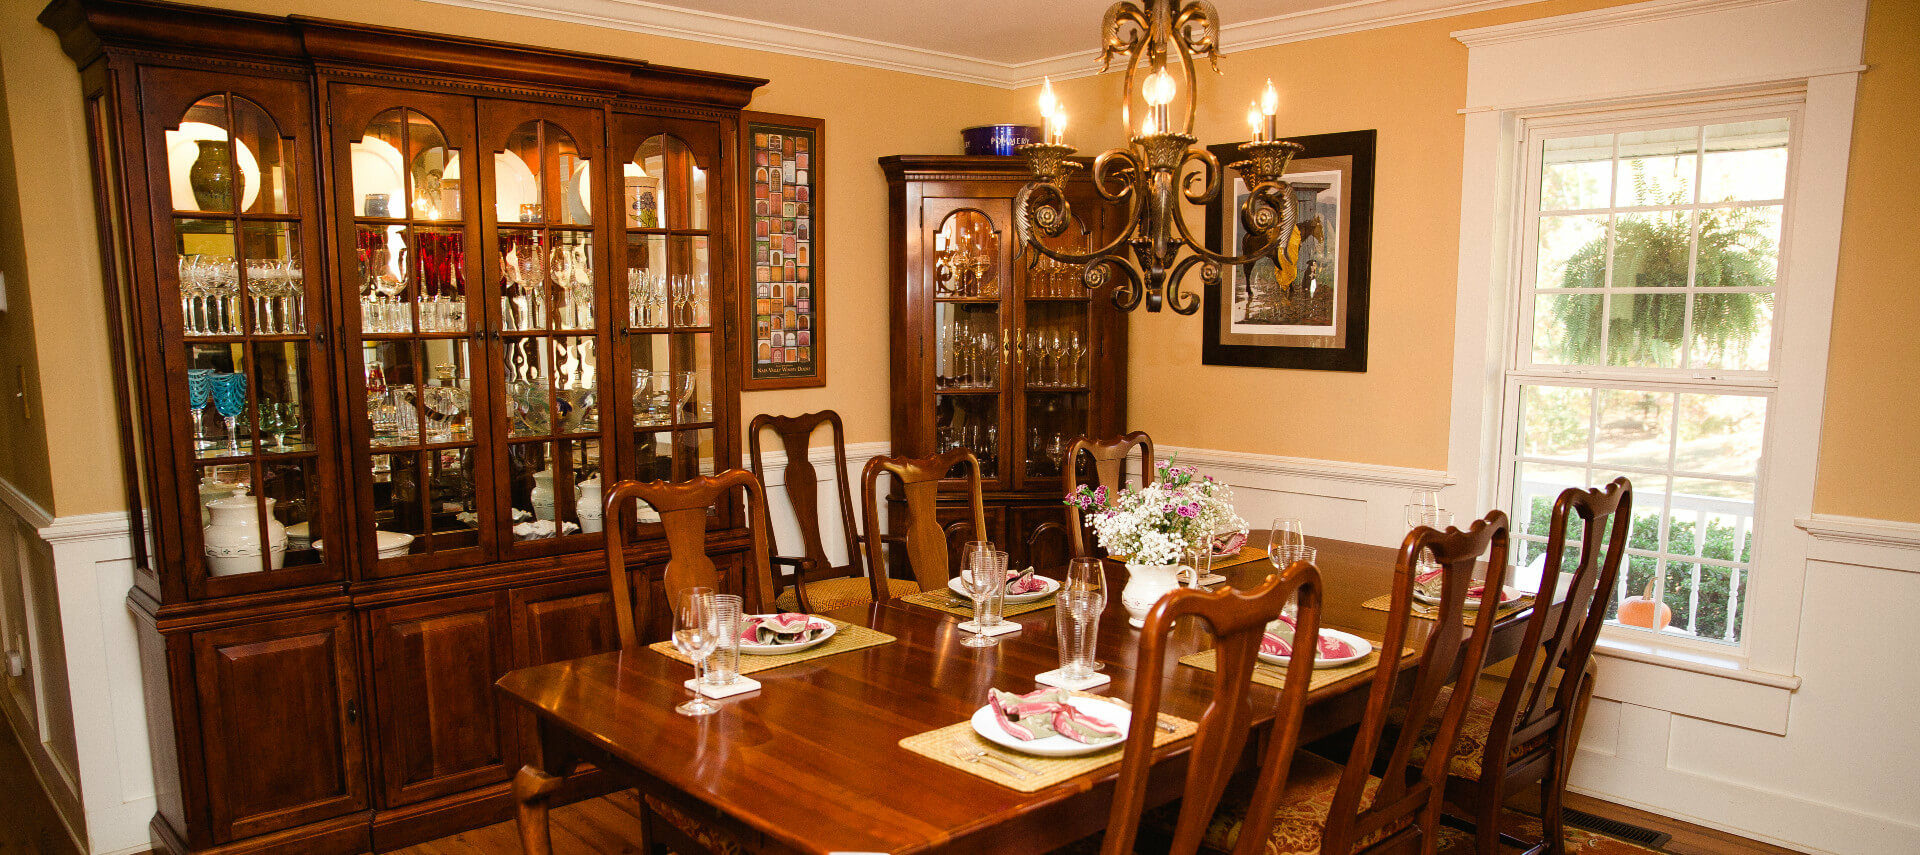 Dining table set for six in a warm and bright dining room with glass china cabinet and corner hutch by window with and wooden floors.